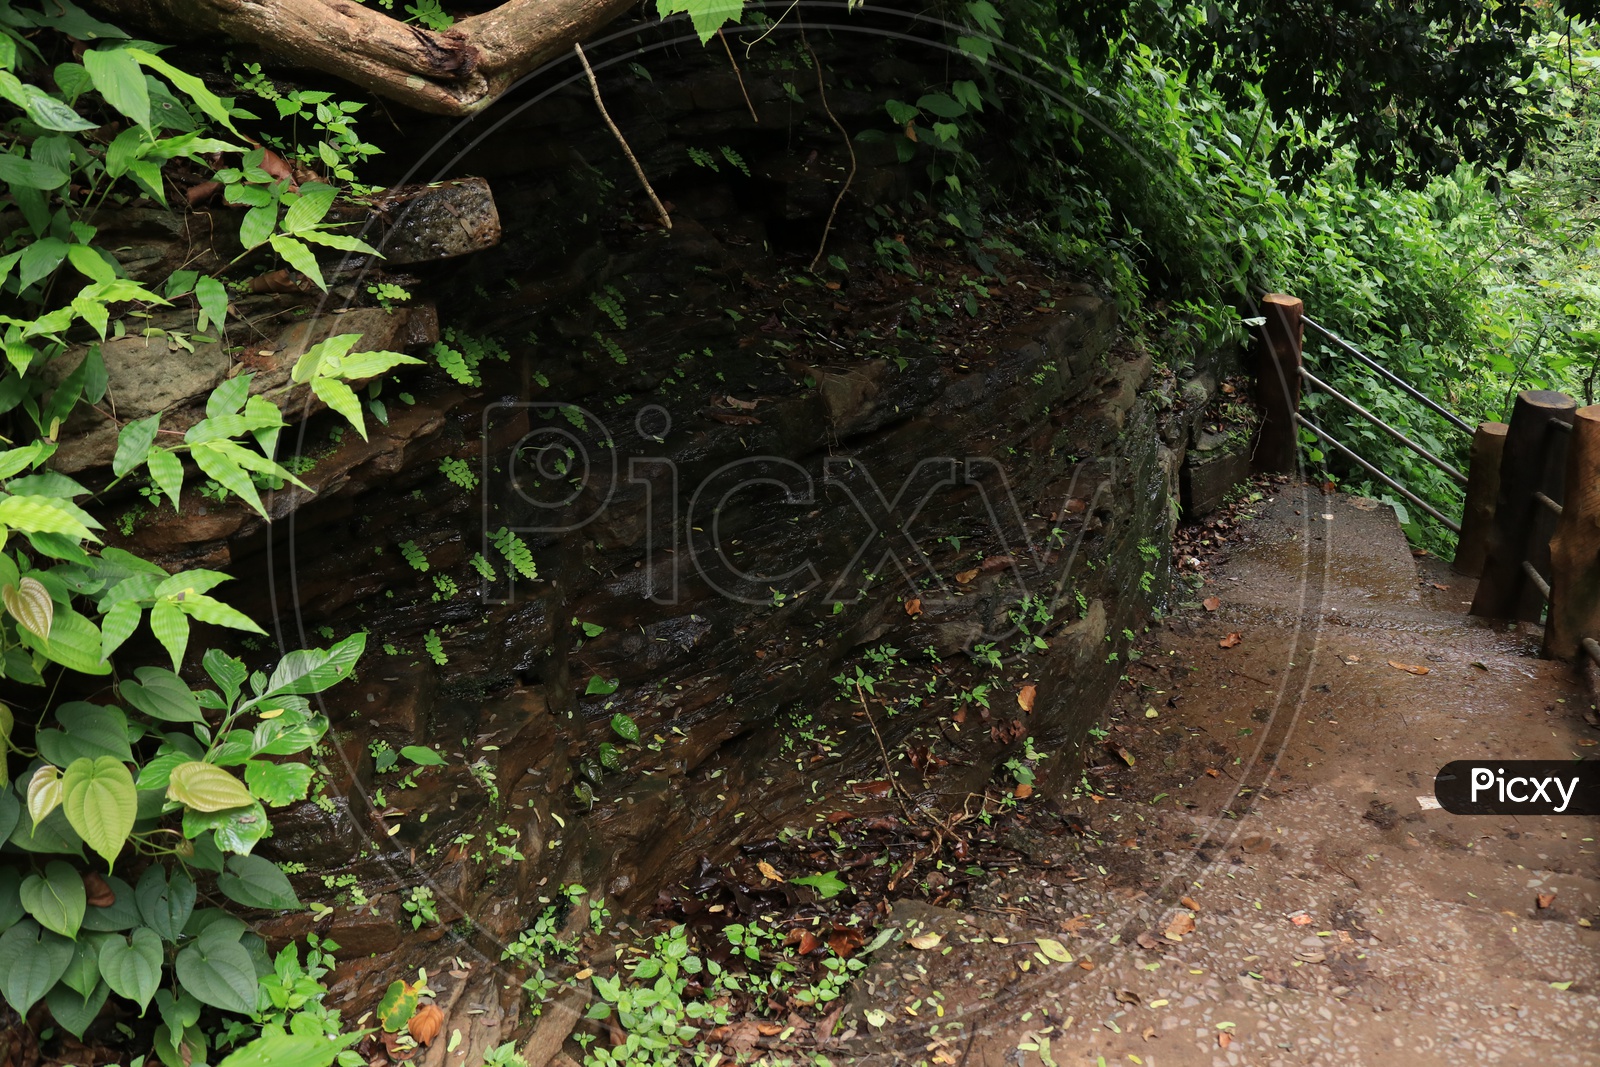 Pathways With Rock Steps at a Water Falls